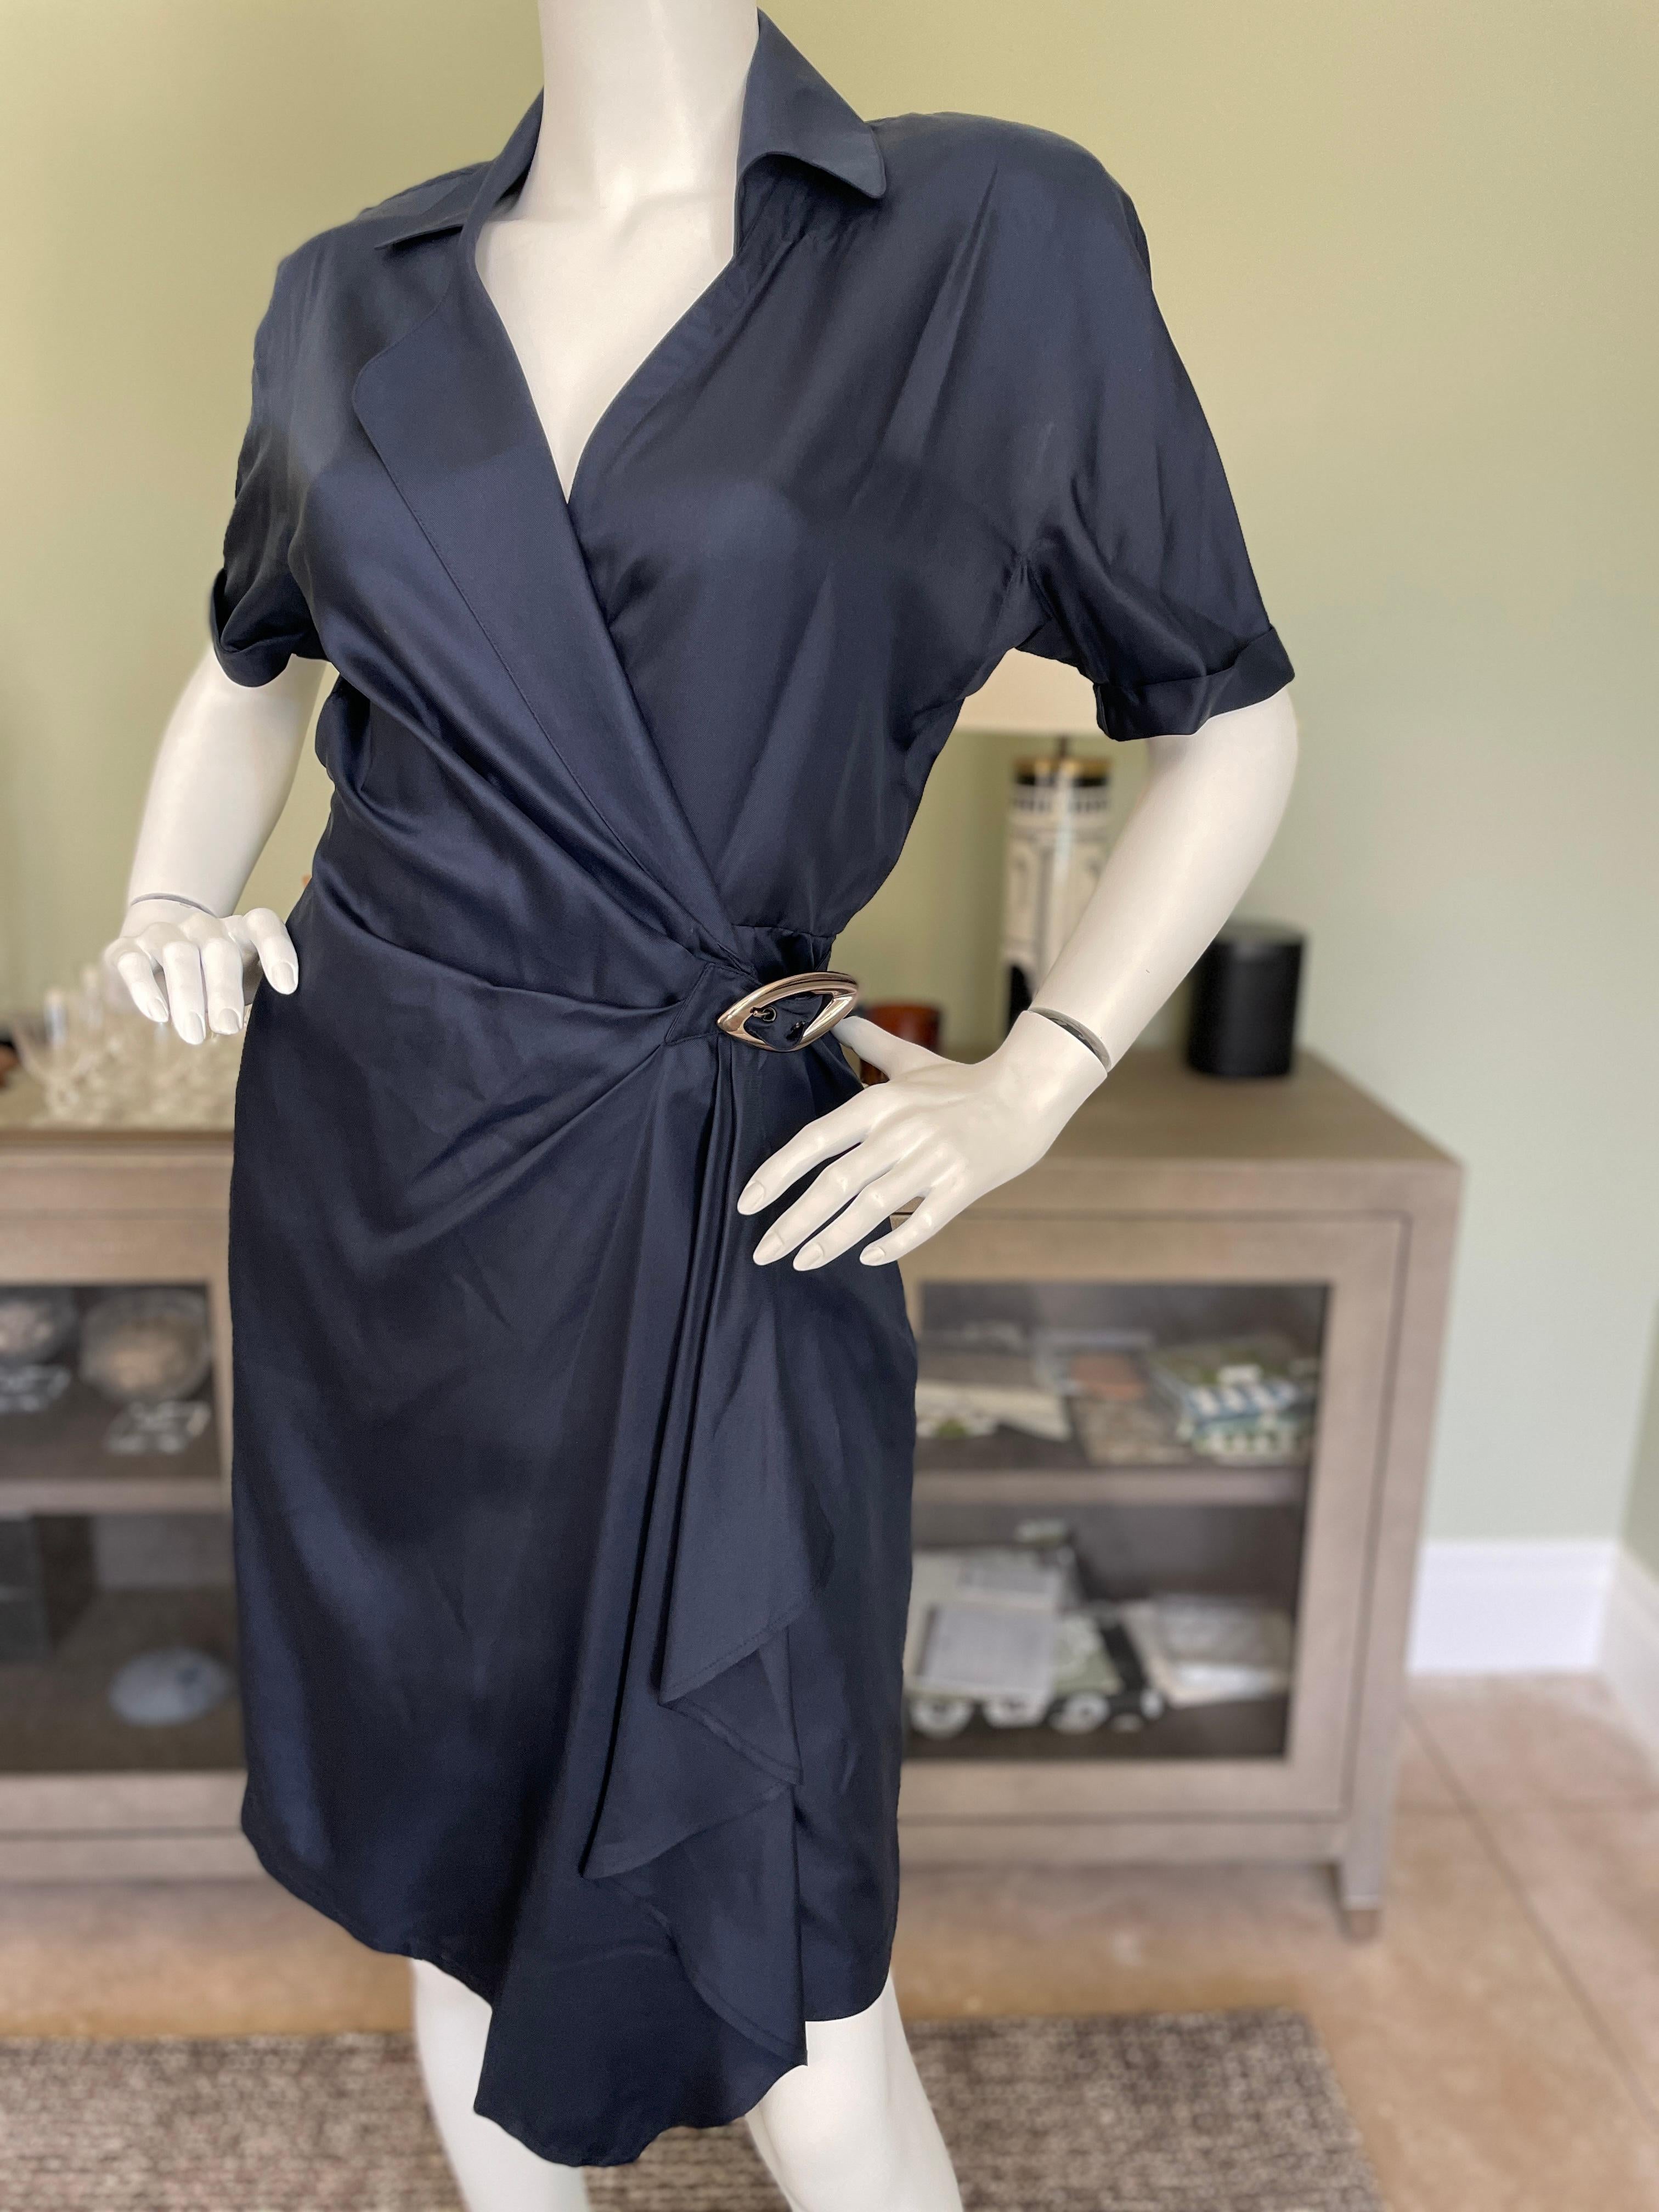 Thierry Mugler Vintage 1980's Navy Blue Silk Wrap Style Dress w Mod Buckle In Excellent Condition For Sale In Cloverdale, CA